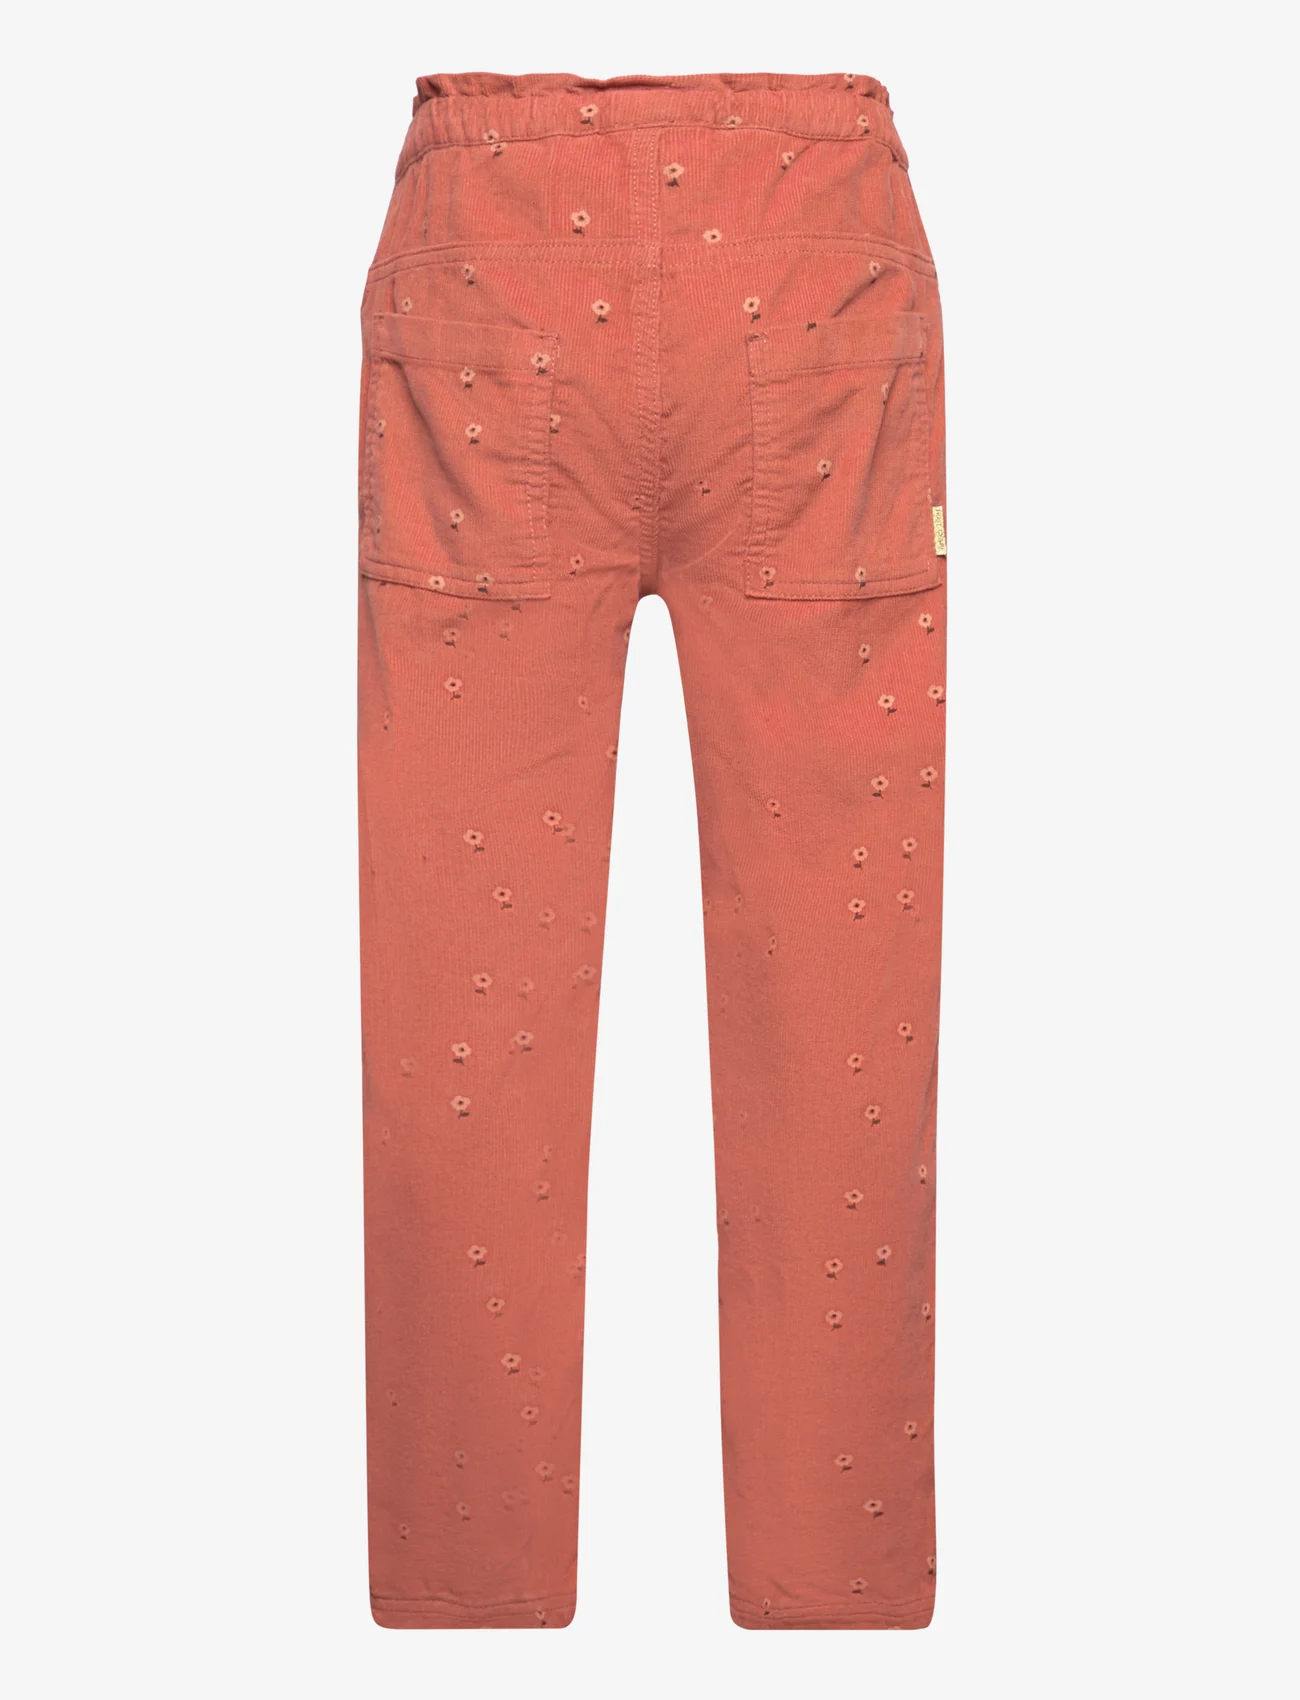 Hust & Claire - Tinna - Trousers - trousers - red clay - 1